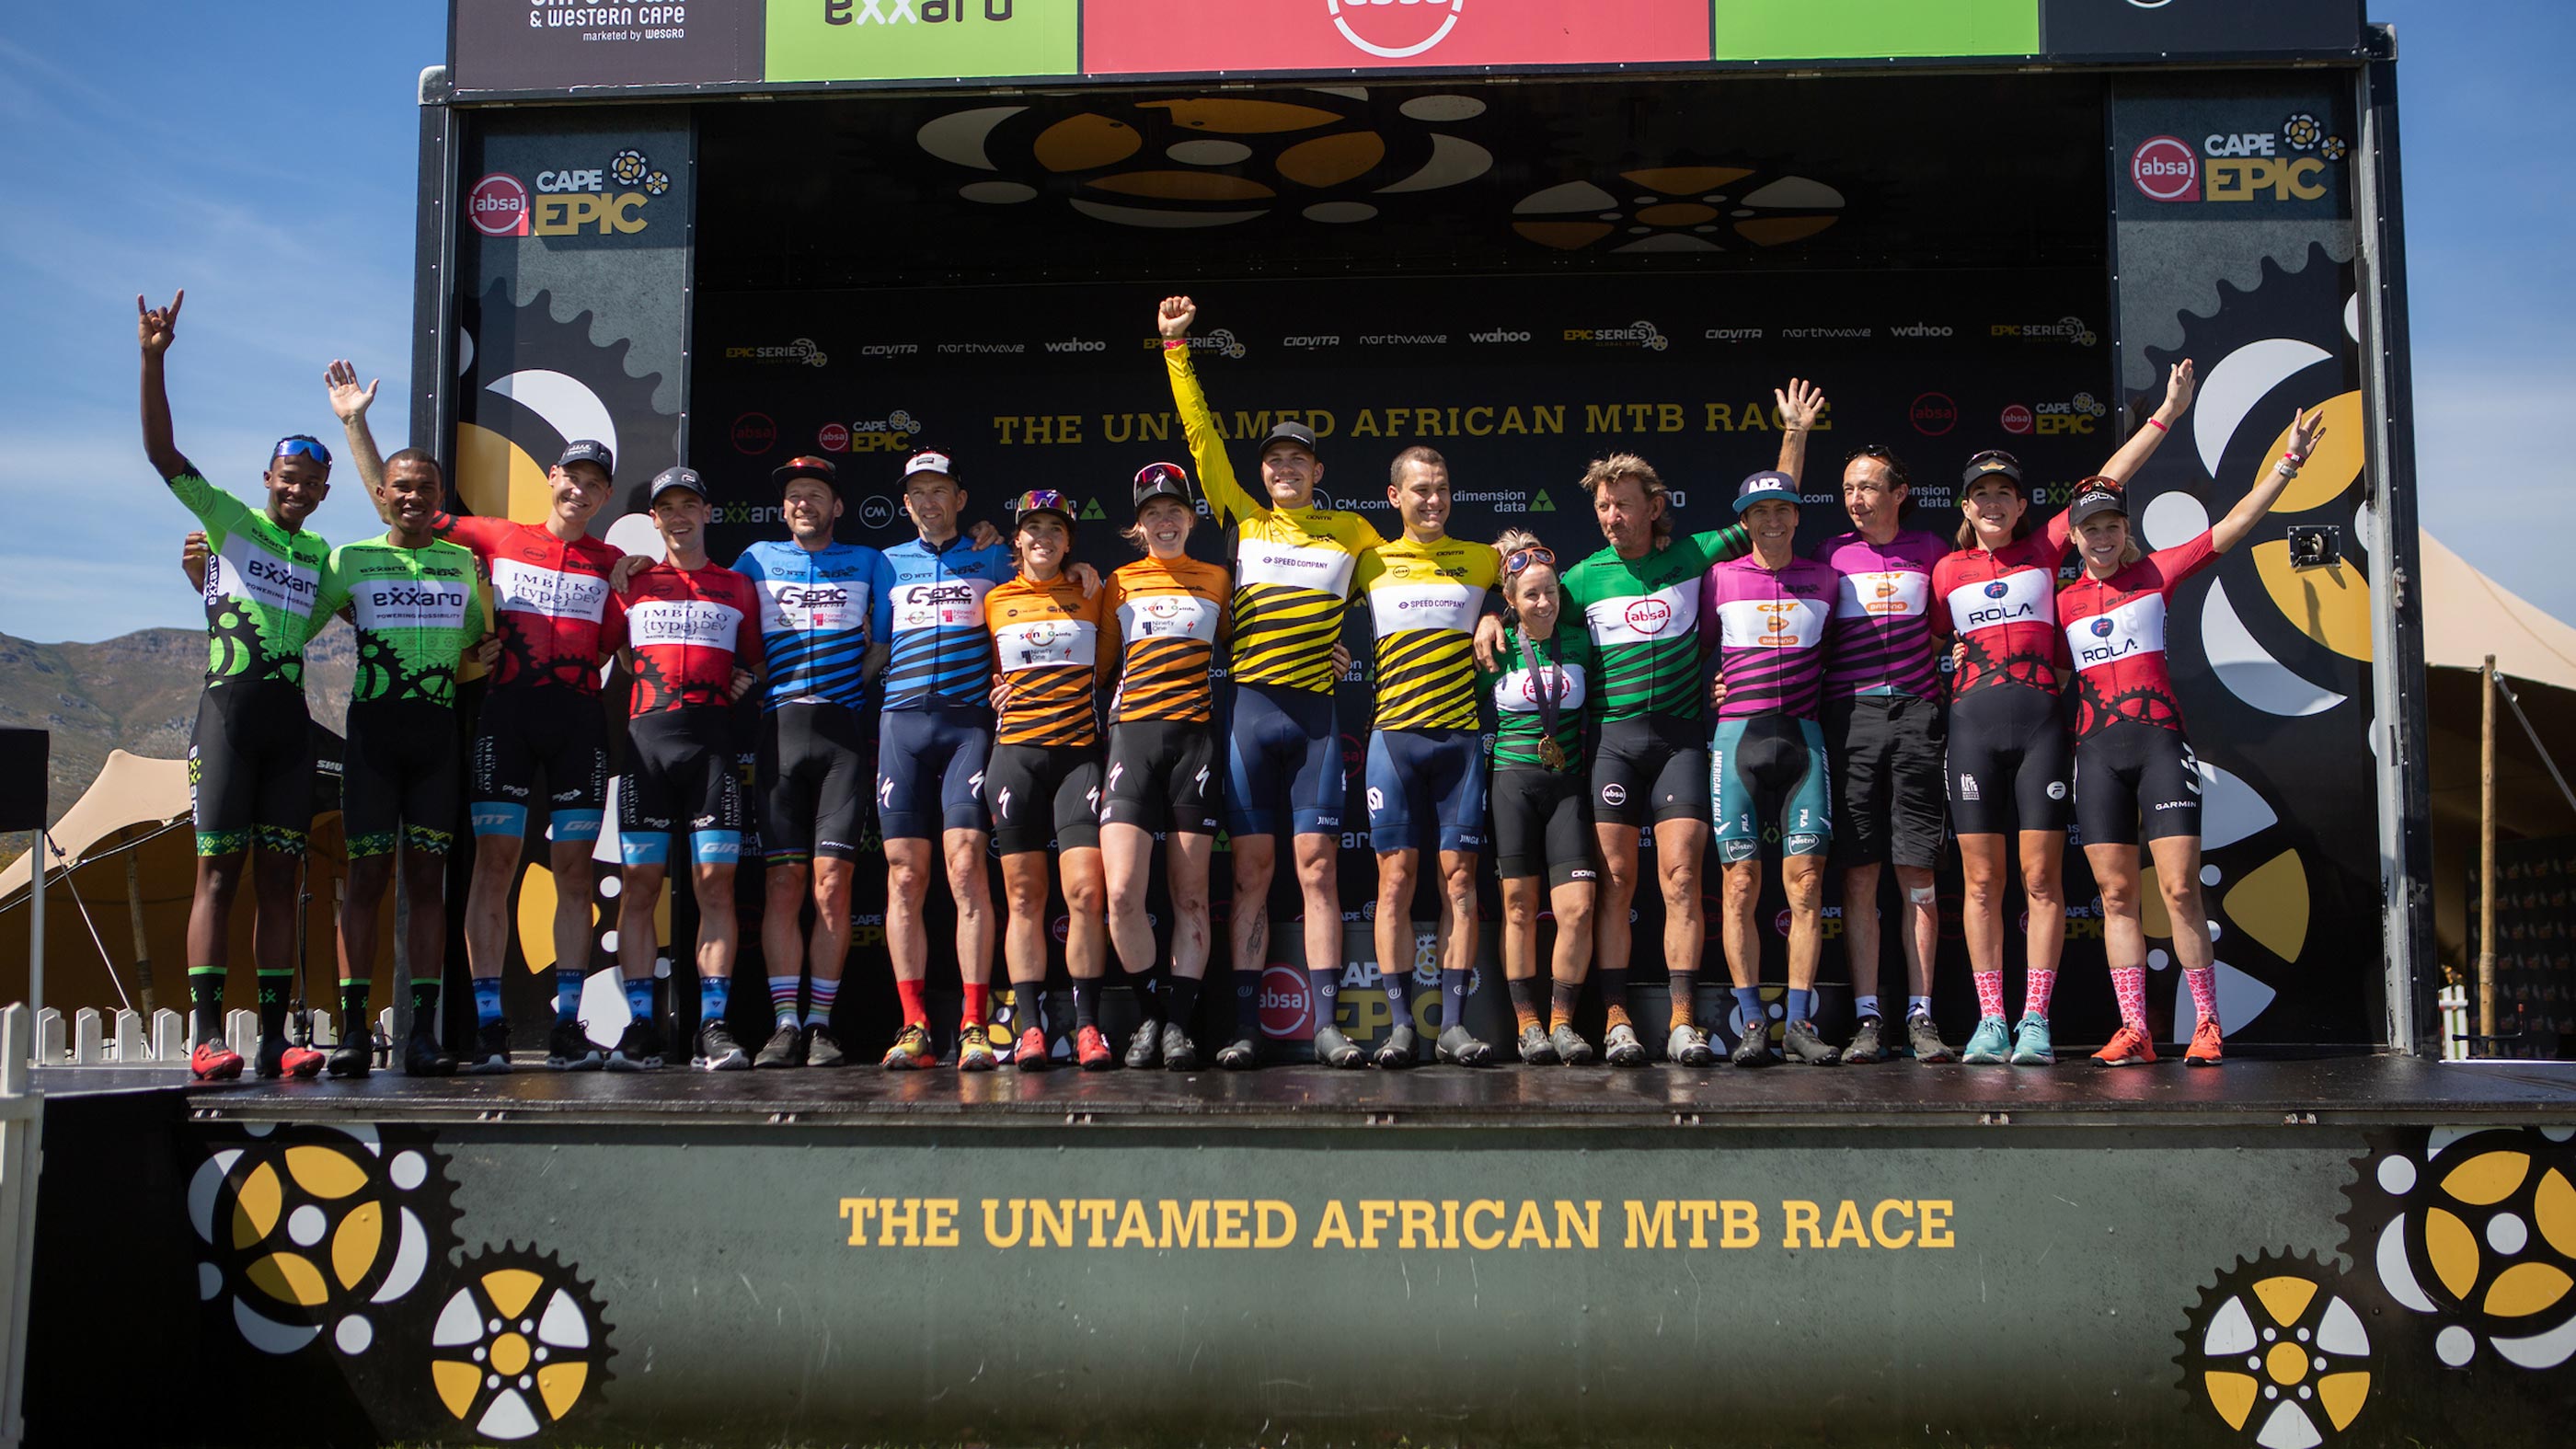 All the Jersey winner of the 2022 Absa Cape Epic Mountain Bike stage race from Stellenbosch to Val de Vie, Paarl, South Africa on the 27th March 2022